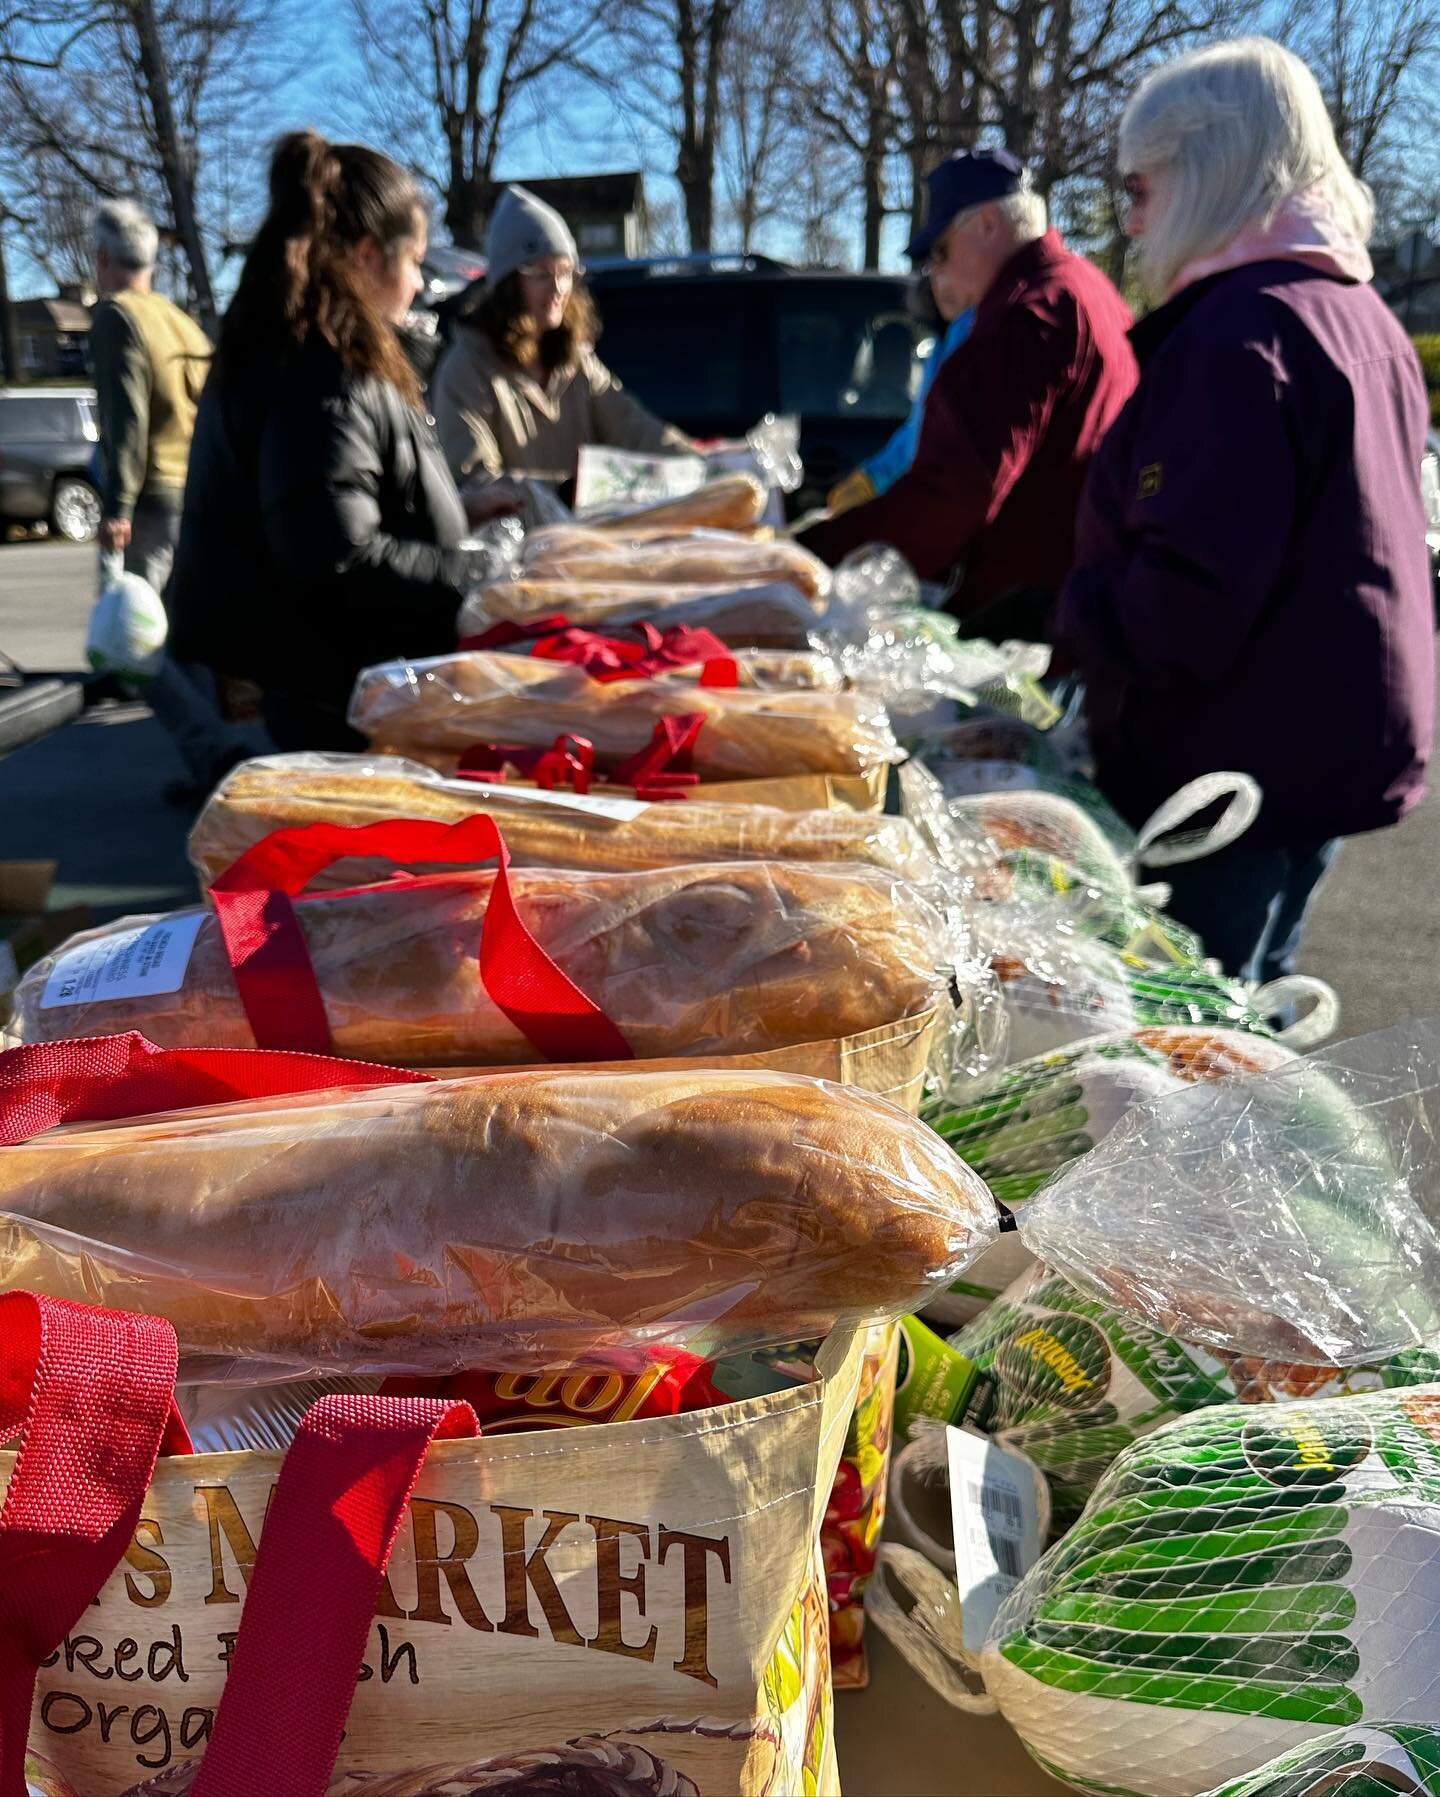 Our 5th(!) annual Thanksgiving #fooddrive last Saturday was our biggest yet, &amp; WHAAAT, the weather was actually nice this time?!? Huge props to the Harris kids, who raised money for 100 Thanksgiving meal bags, which the whole fam put together &am